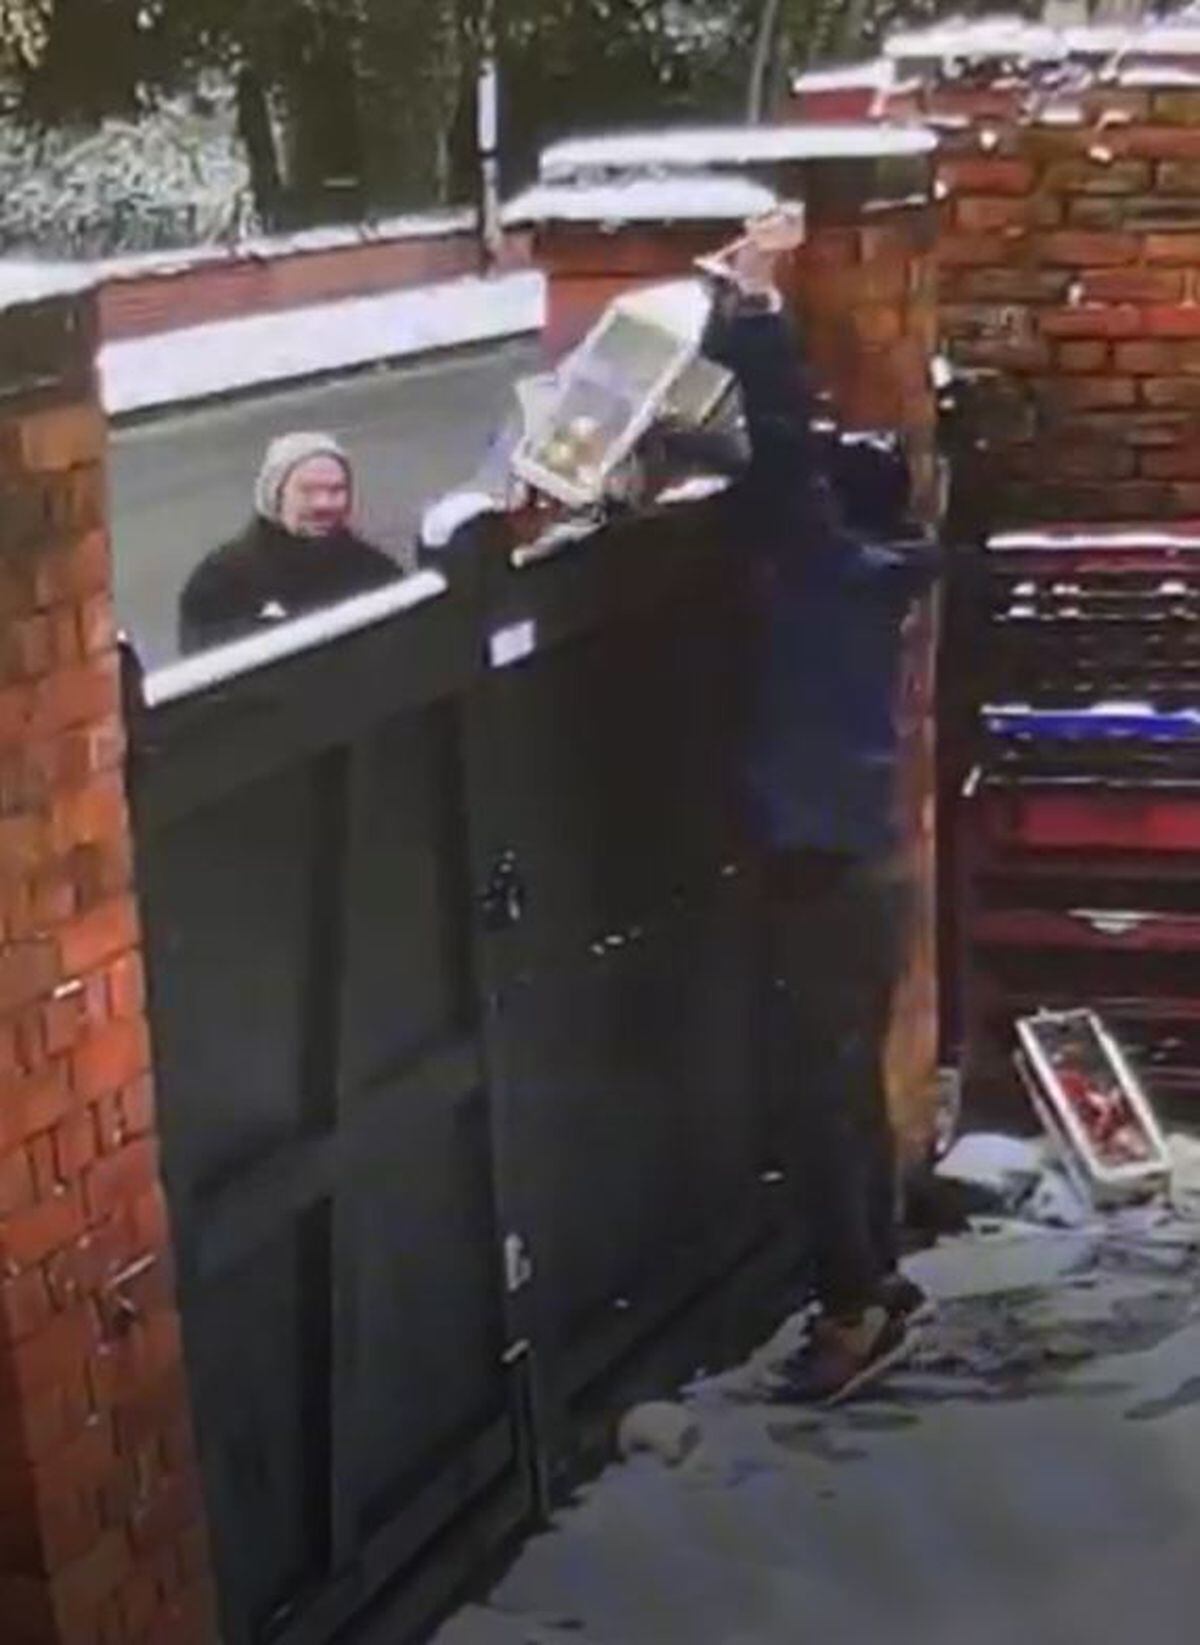 CCTV stills showing the suspects with items 